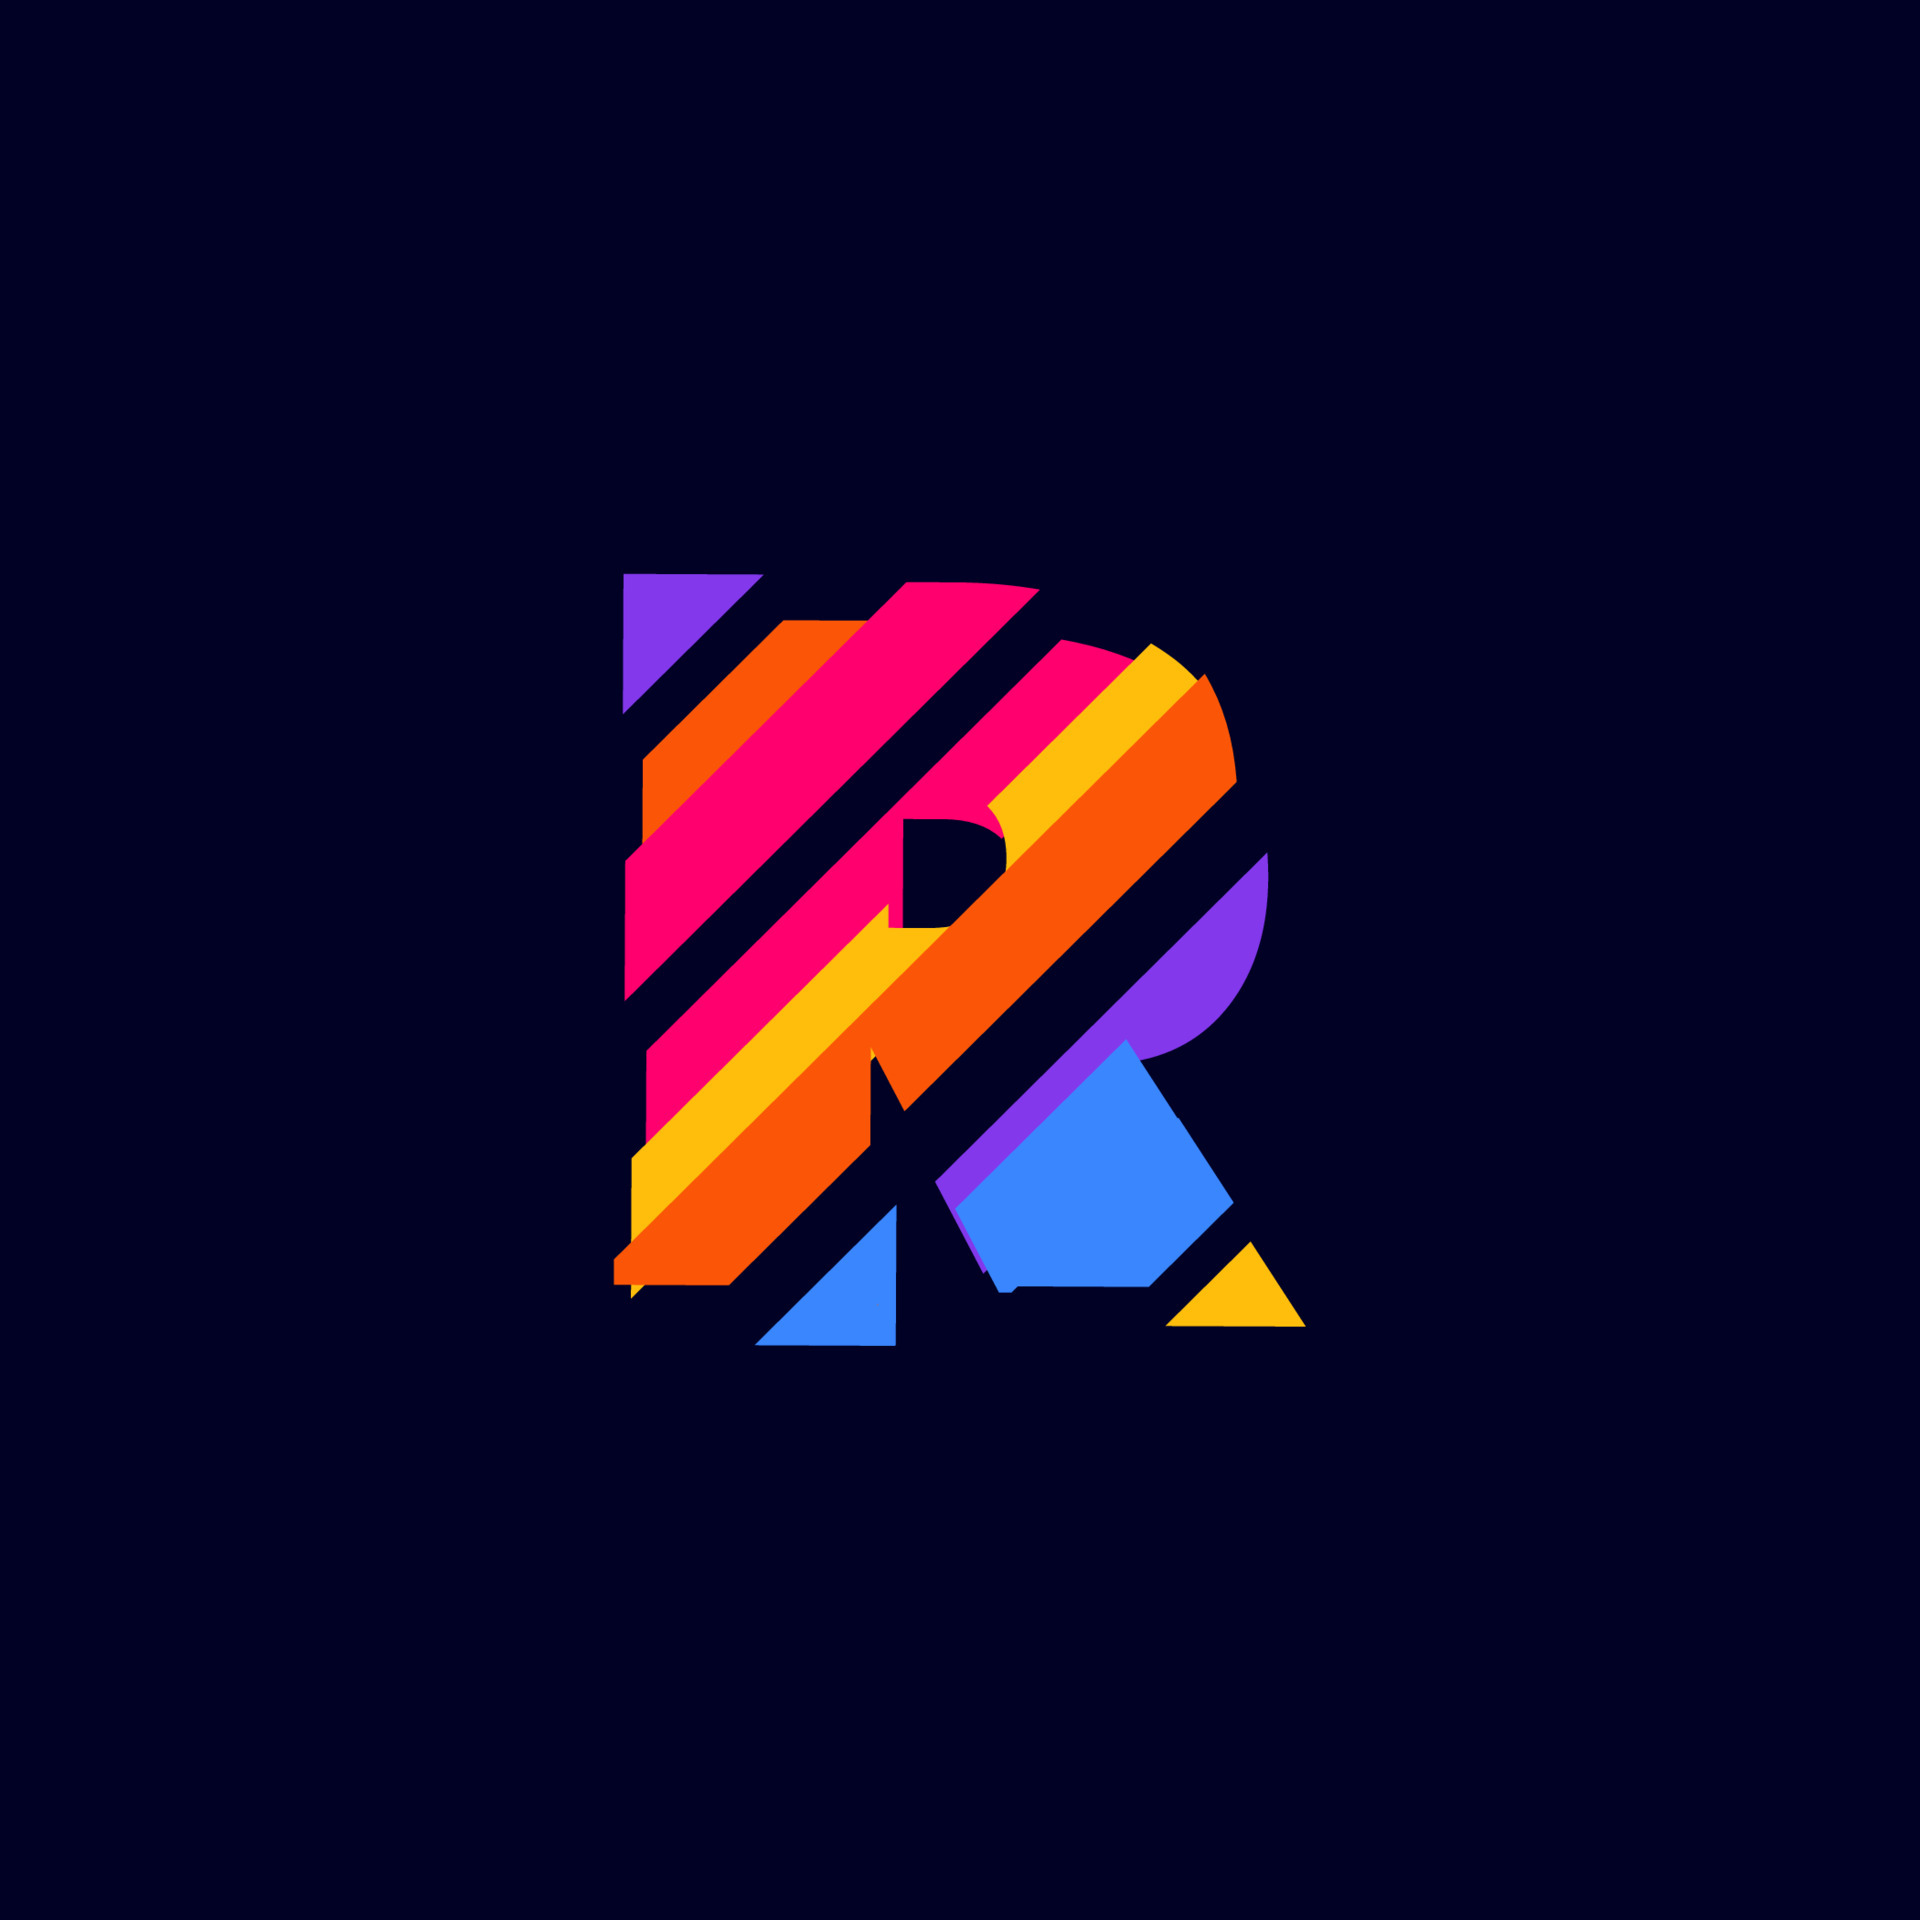 Colorful Abstract R Letter logo volume design template. R font icon ...